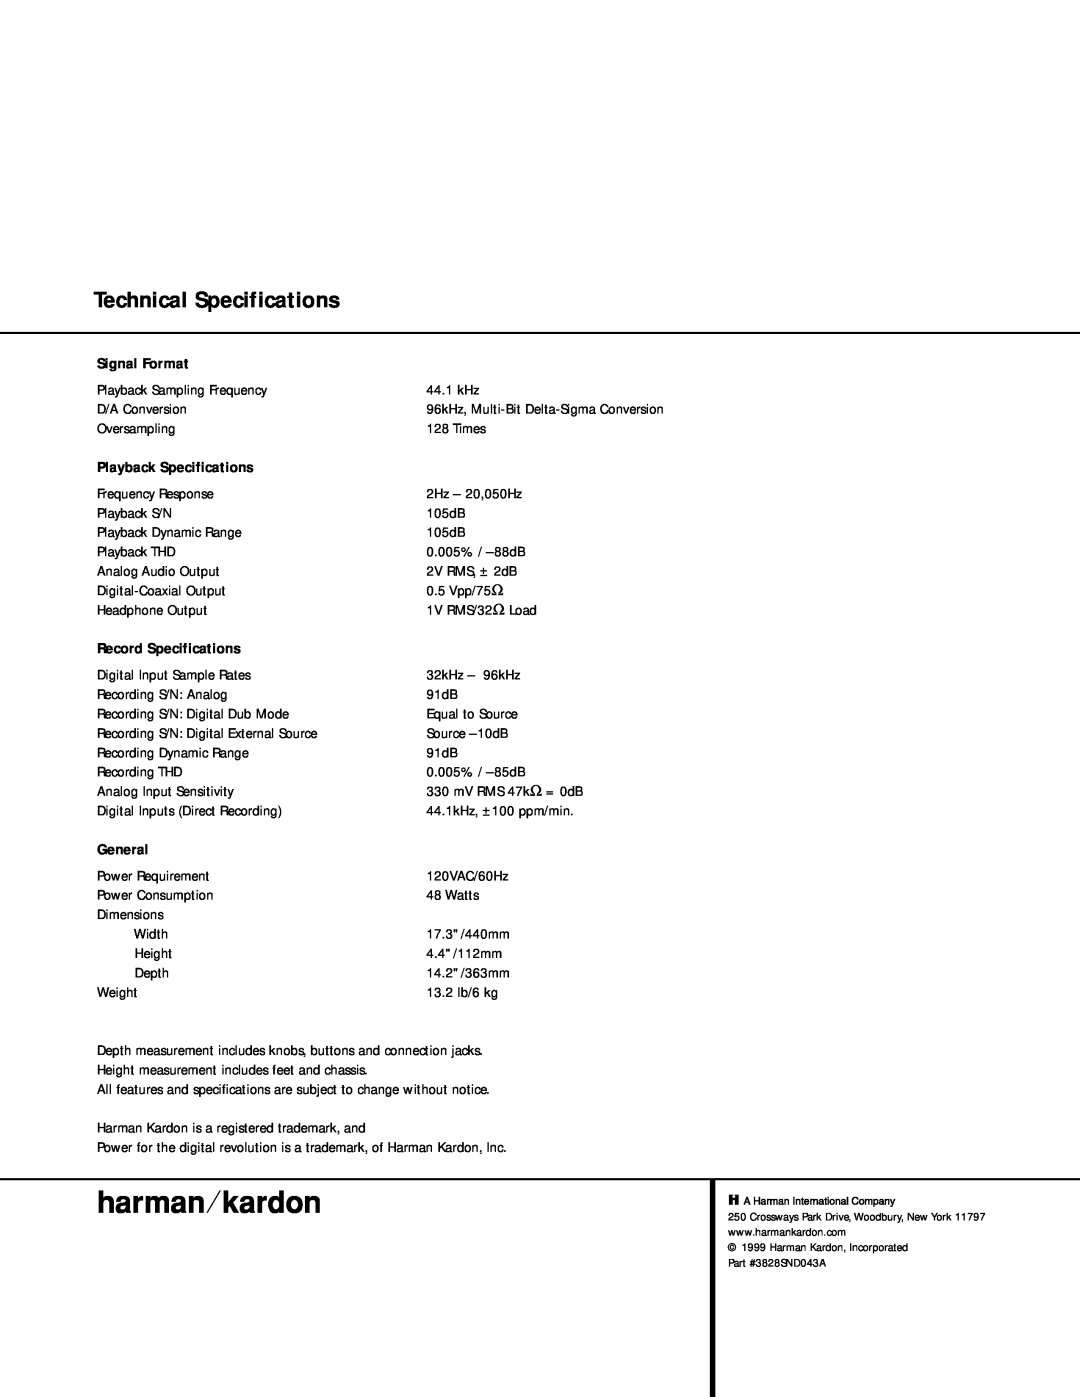 Harman-Kardon CDR 2 Technical Specifications, Signal Format, Playback Specifications, Record Specifications, General 